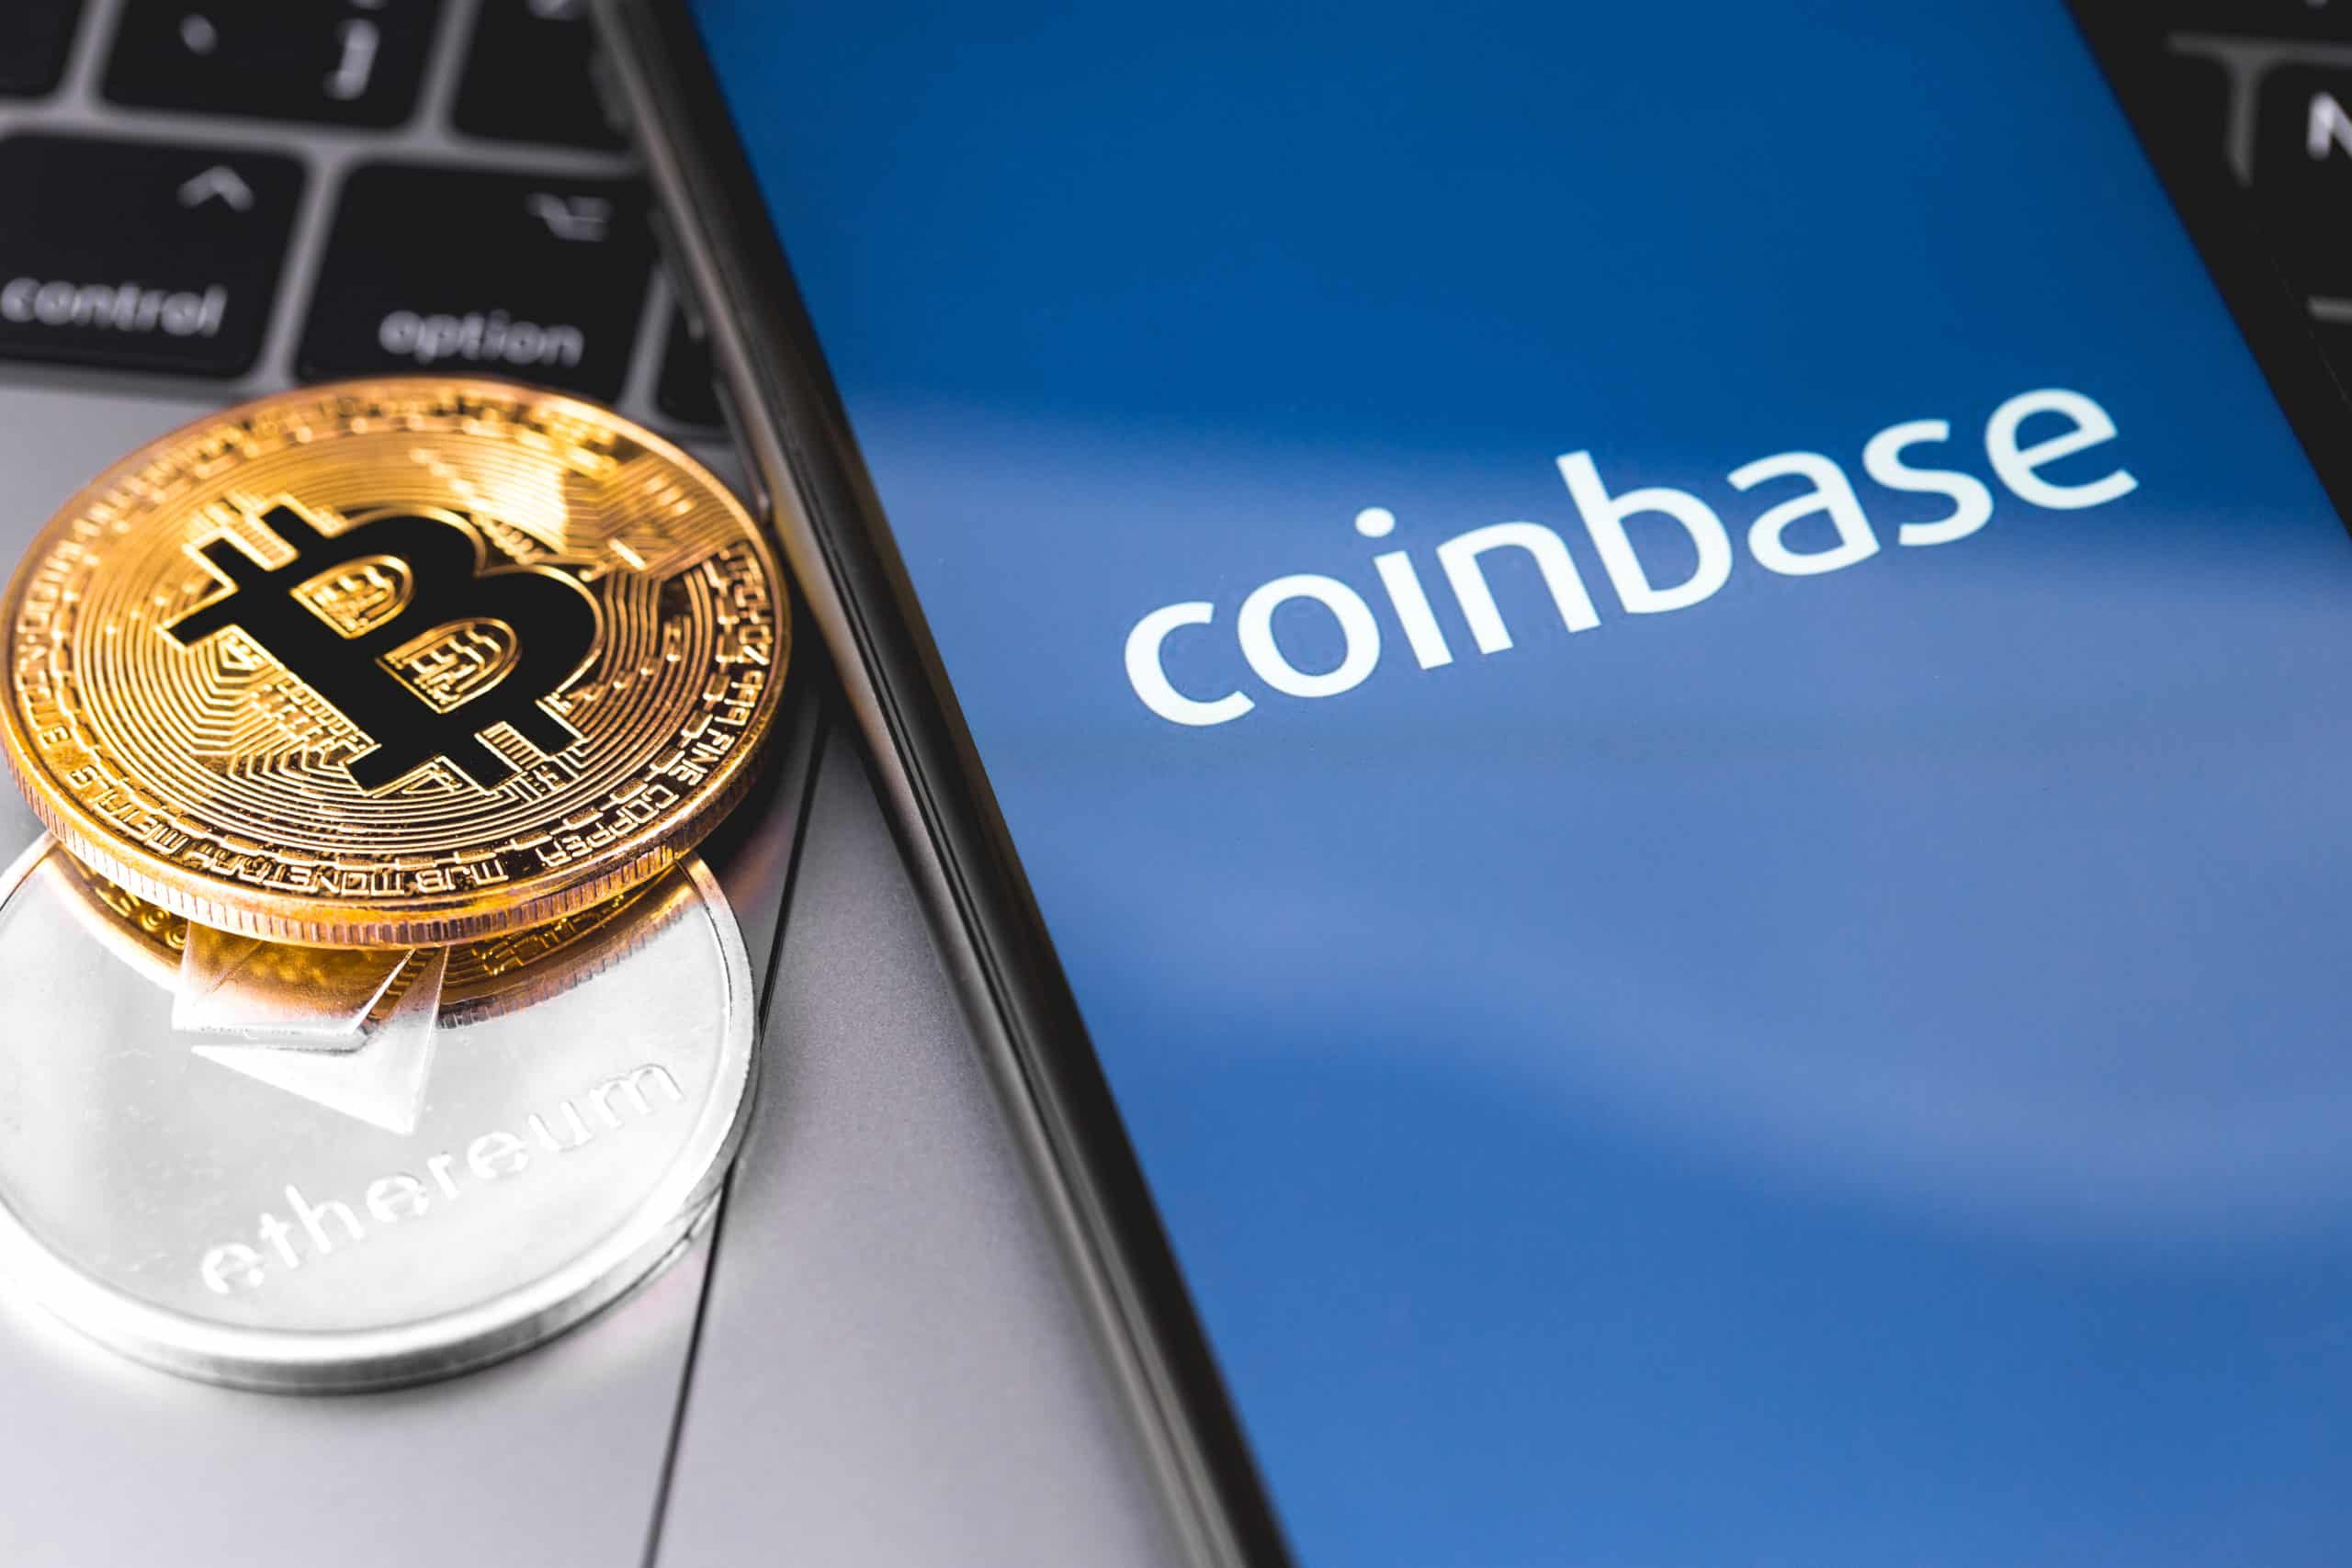 As the Price of Bitcoin Reaches an All-Time High, Coinbase Experiences Yet Another Outage